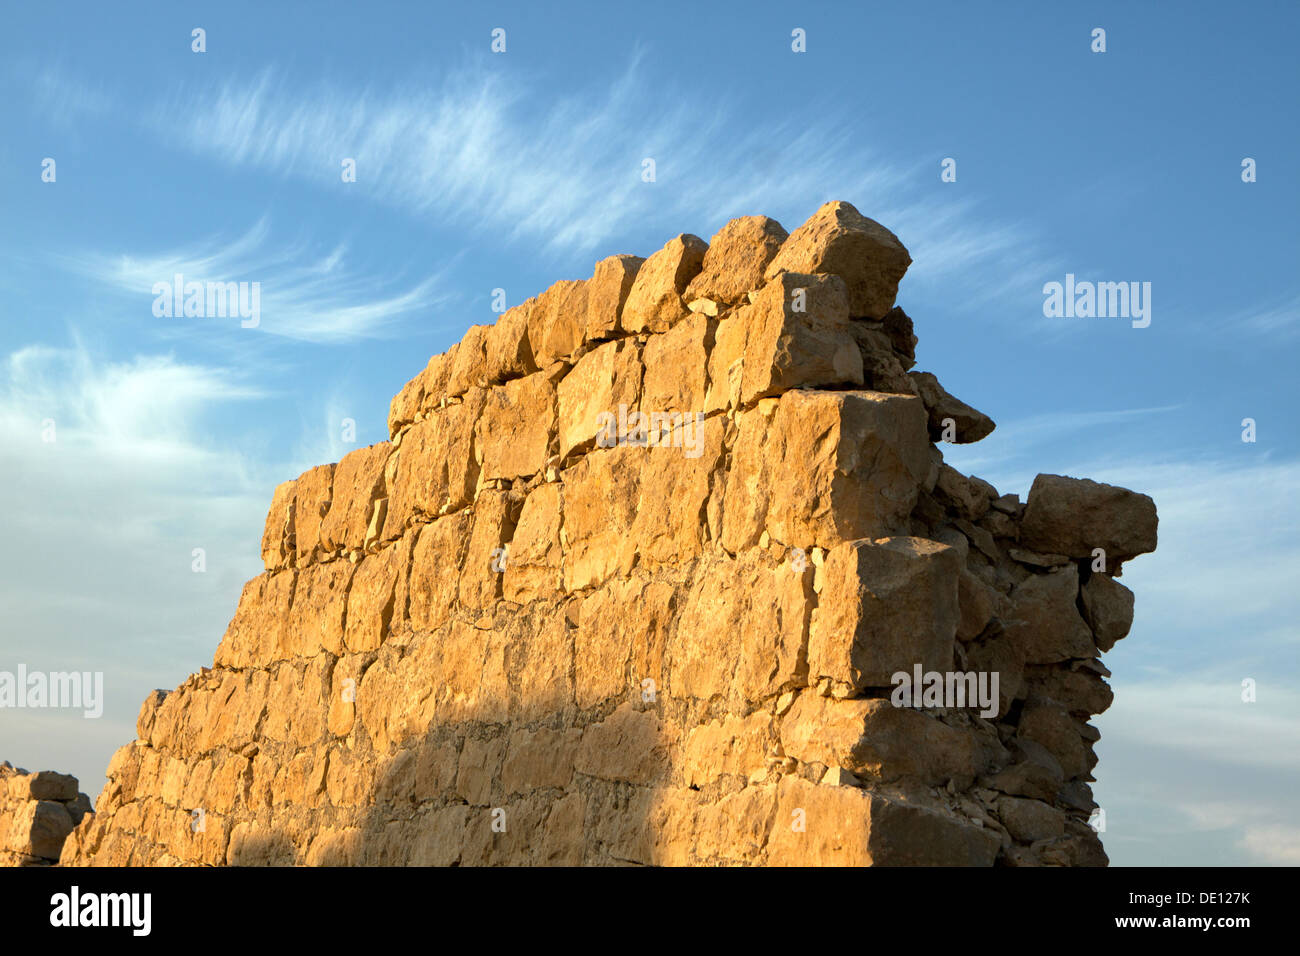 Israel, Northern Negev Mountain. Ruins of Shivta, built in the 1st century by the Nabateans. Stock Photo